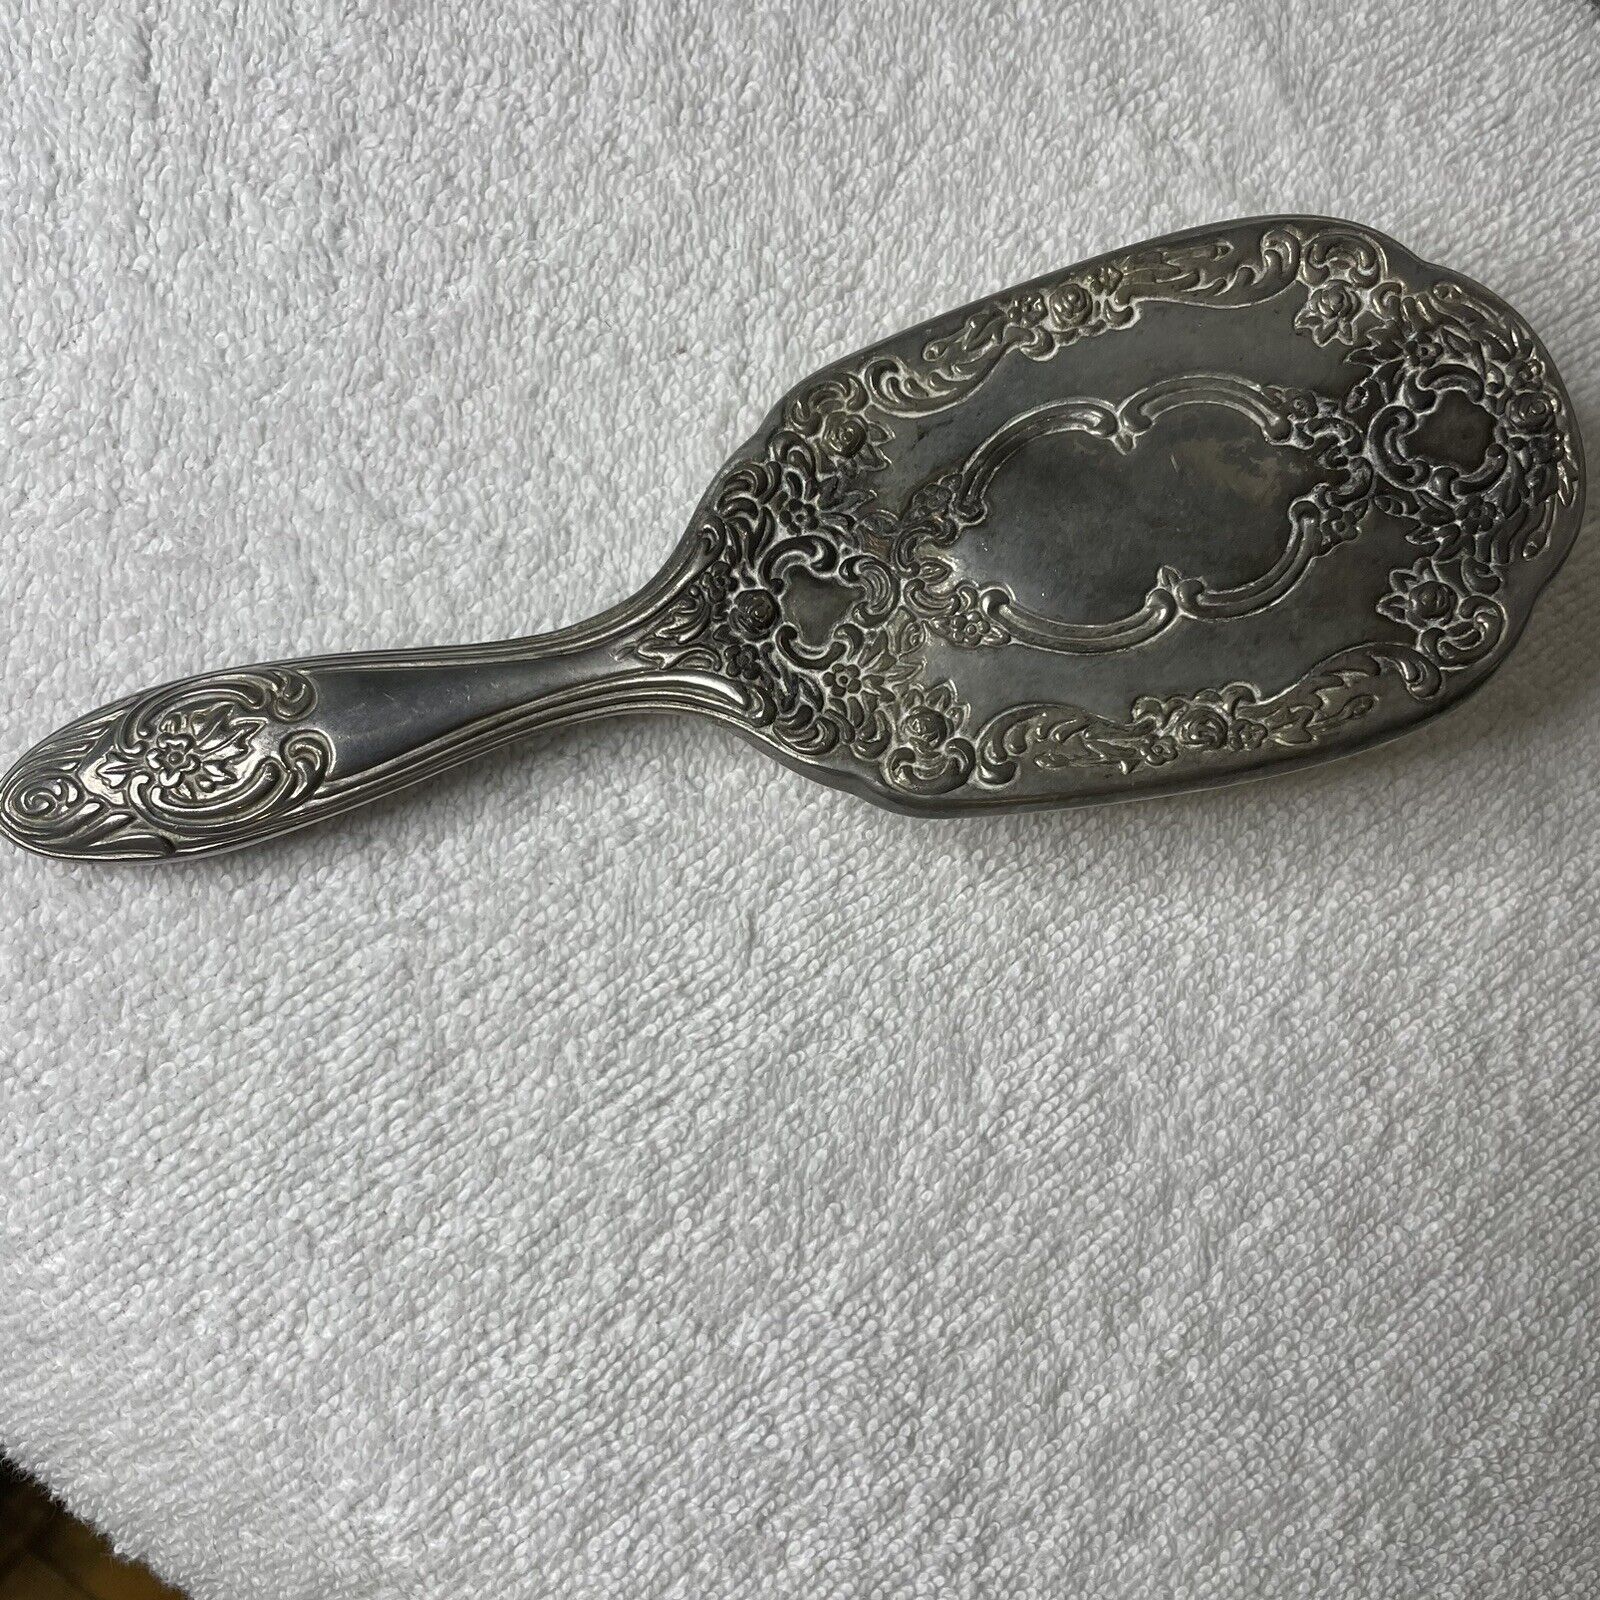 Vintage Ornate Hair Brush Silver Plated Nice Condition Weights = 9.6 oz.